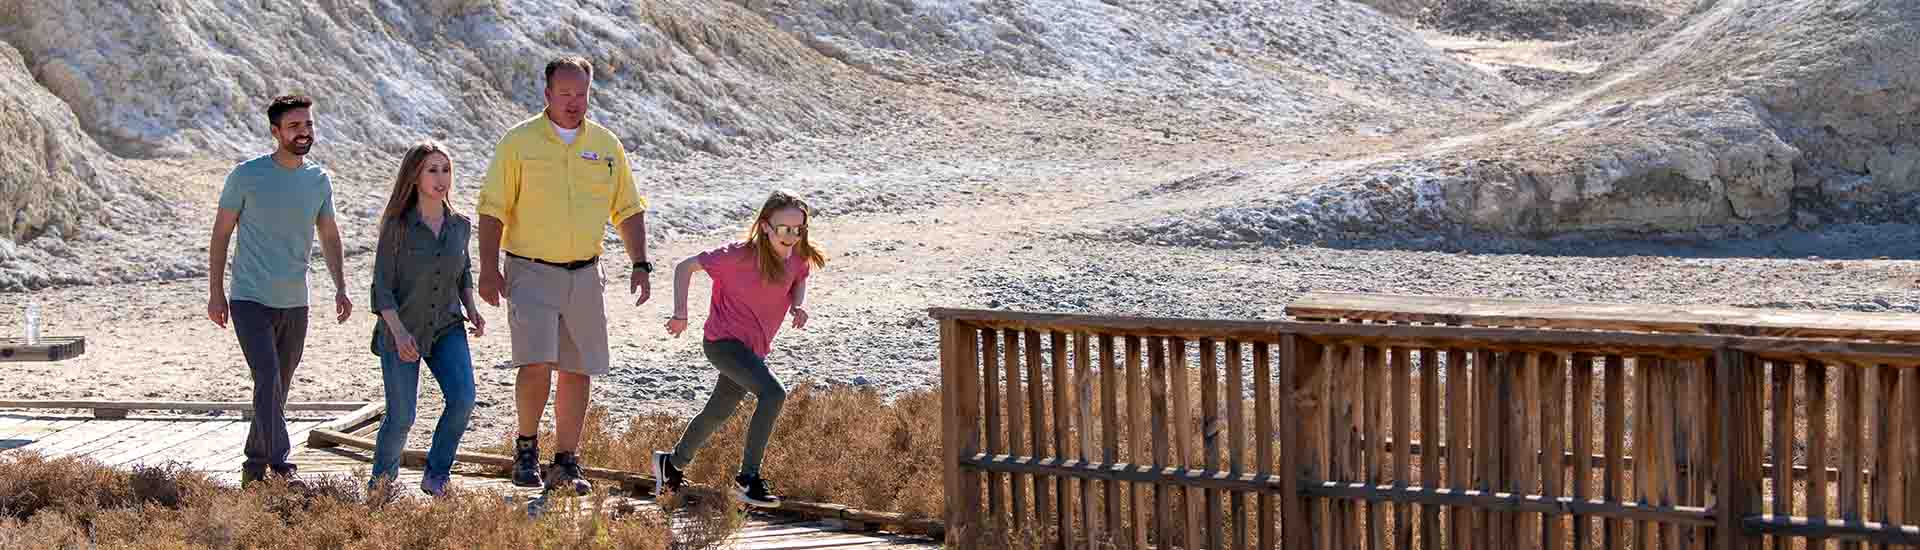 Pink Adventure Tour guide and guests, with girl running towards wooden bridge, Salt Creek Interpretive Trail, Death Valley National Park